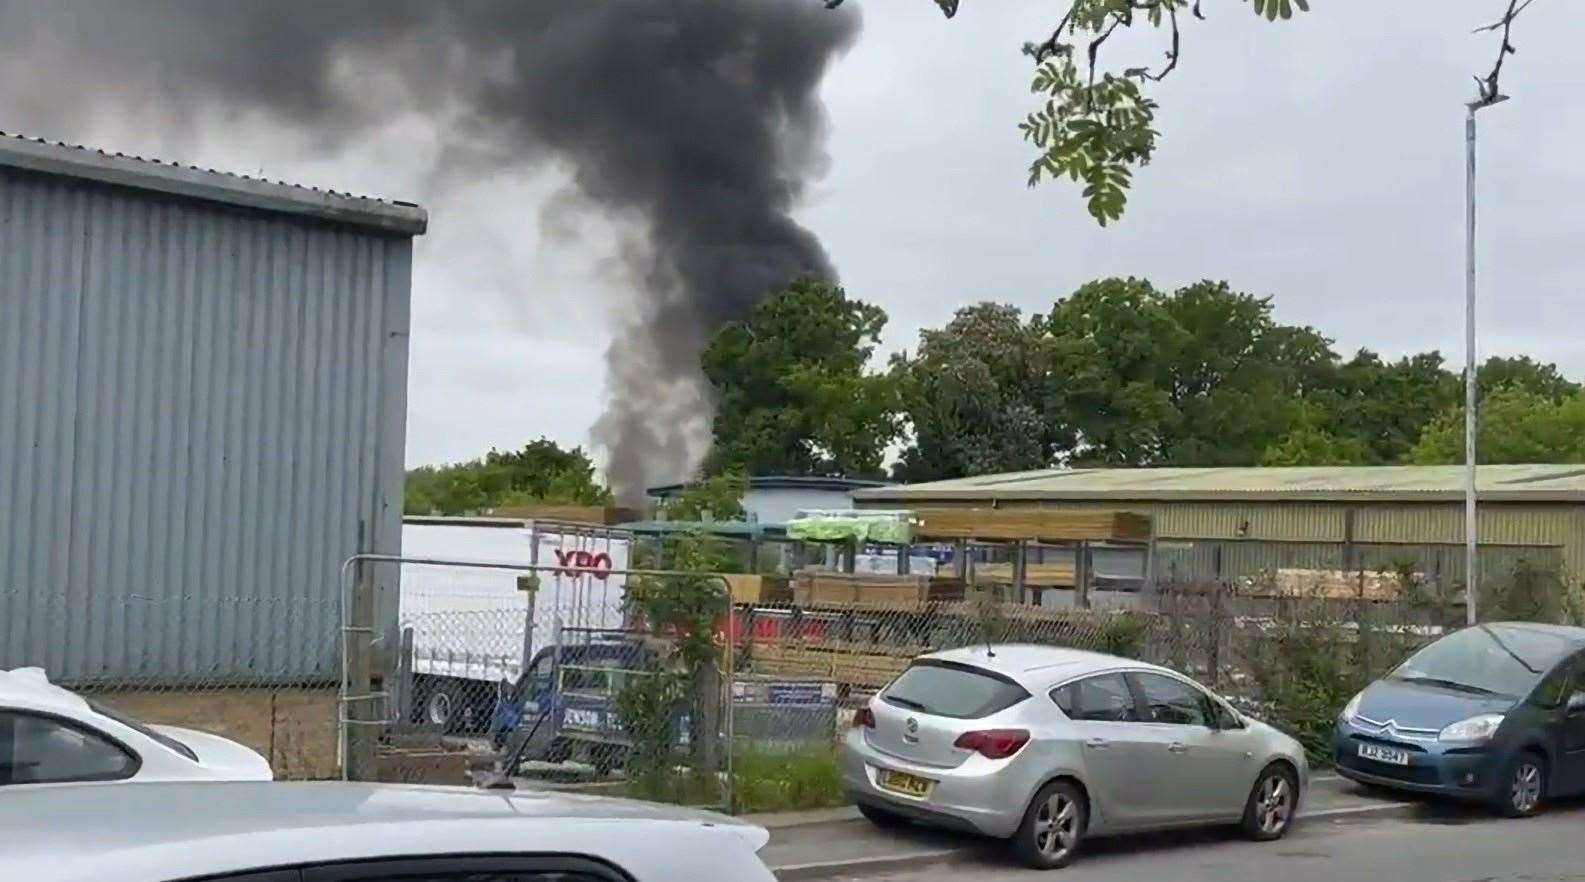 Fire engines were called to the scene. Picture credit: Daniel Hardcaste @DanBHardcastle/Twitter